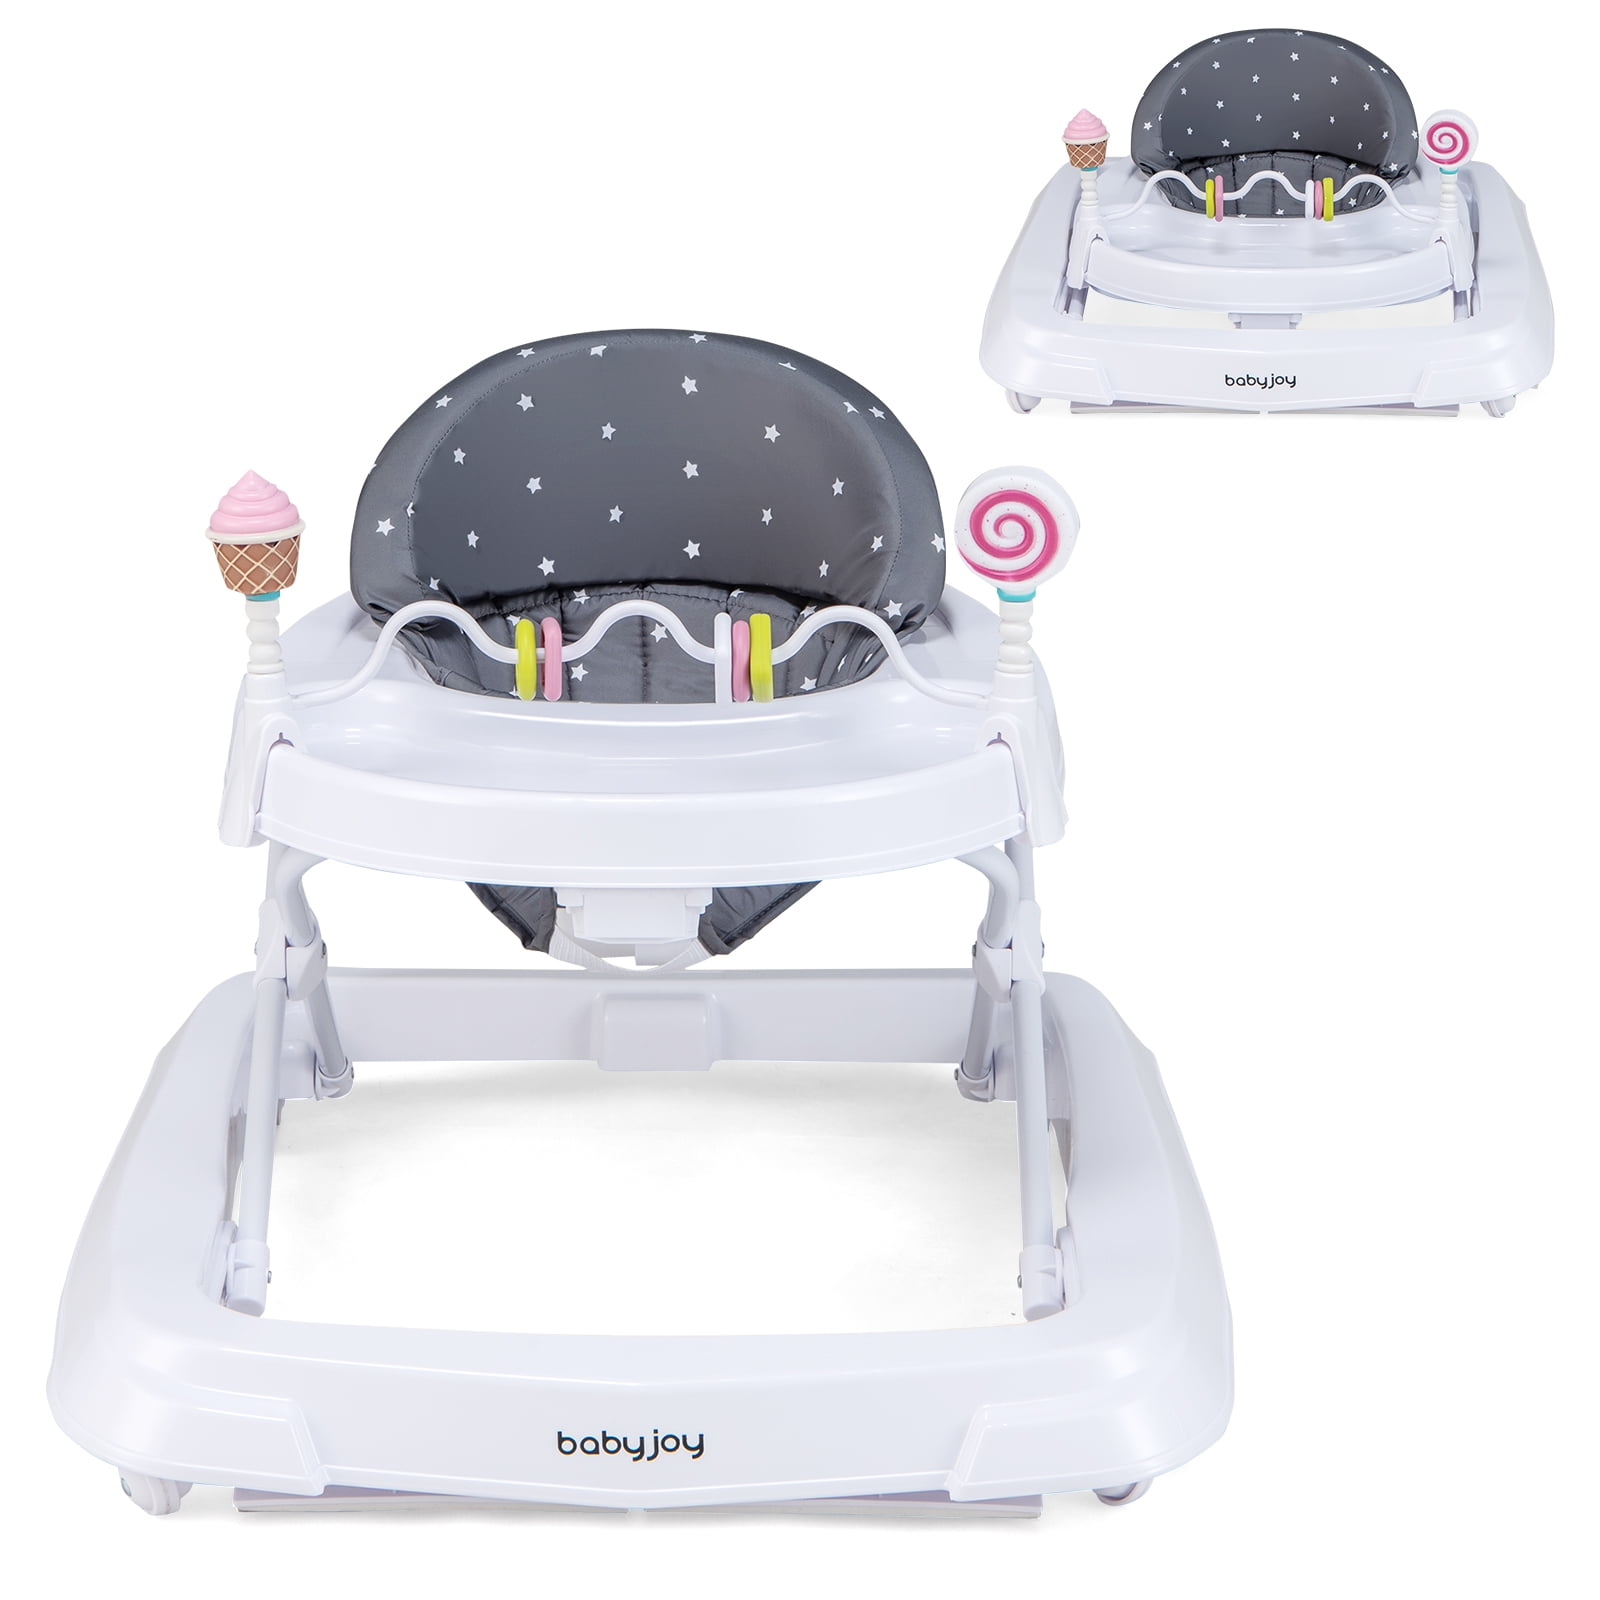 2-in-1 Foldable Baby Activity Walker with Adjustable Height